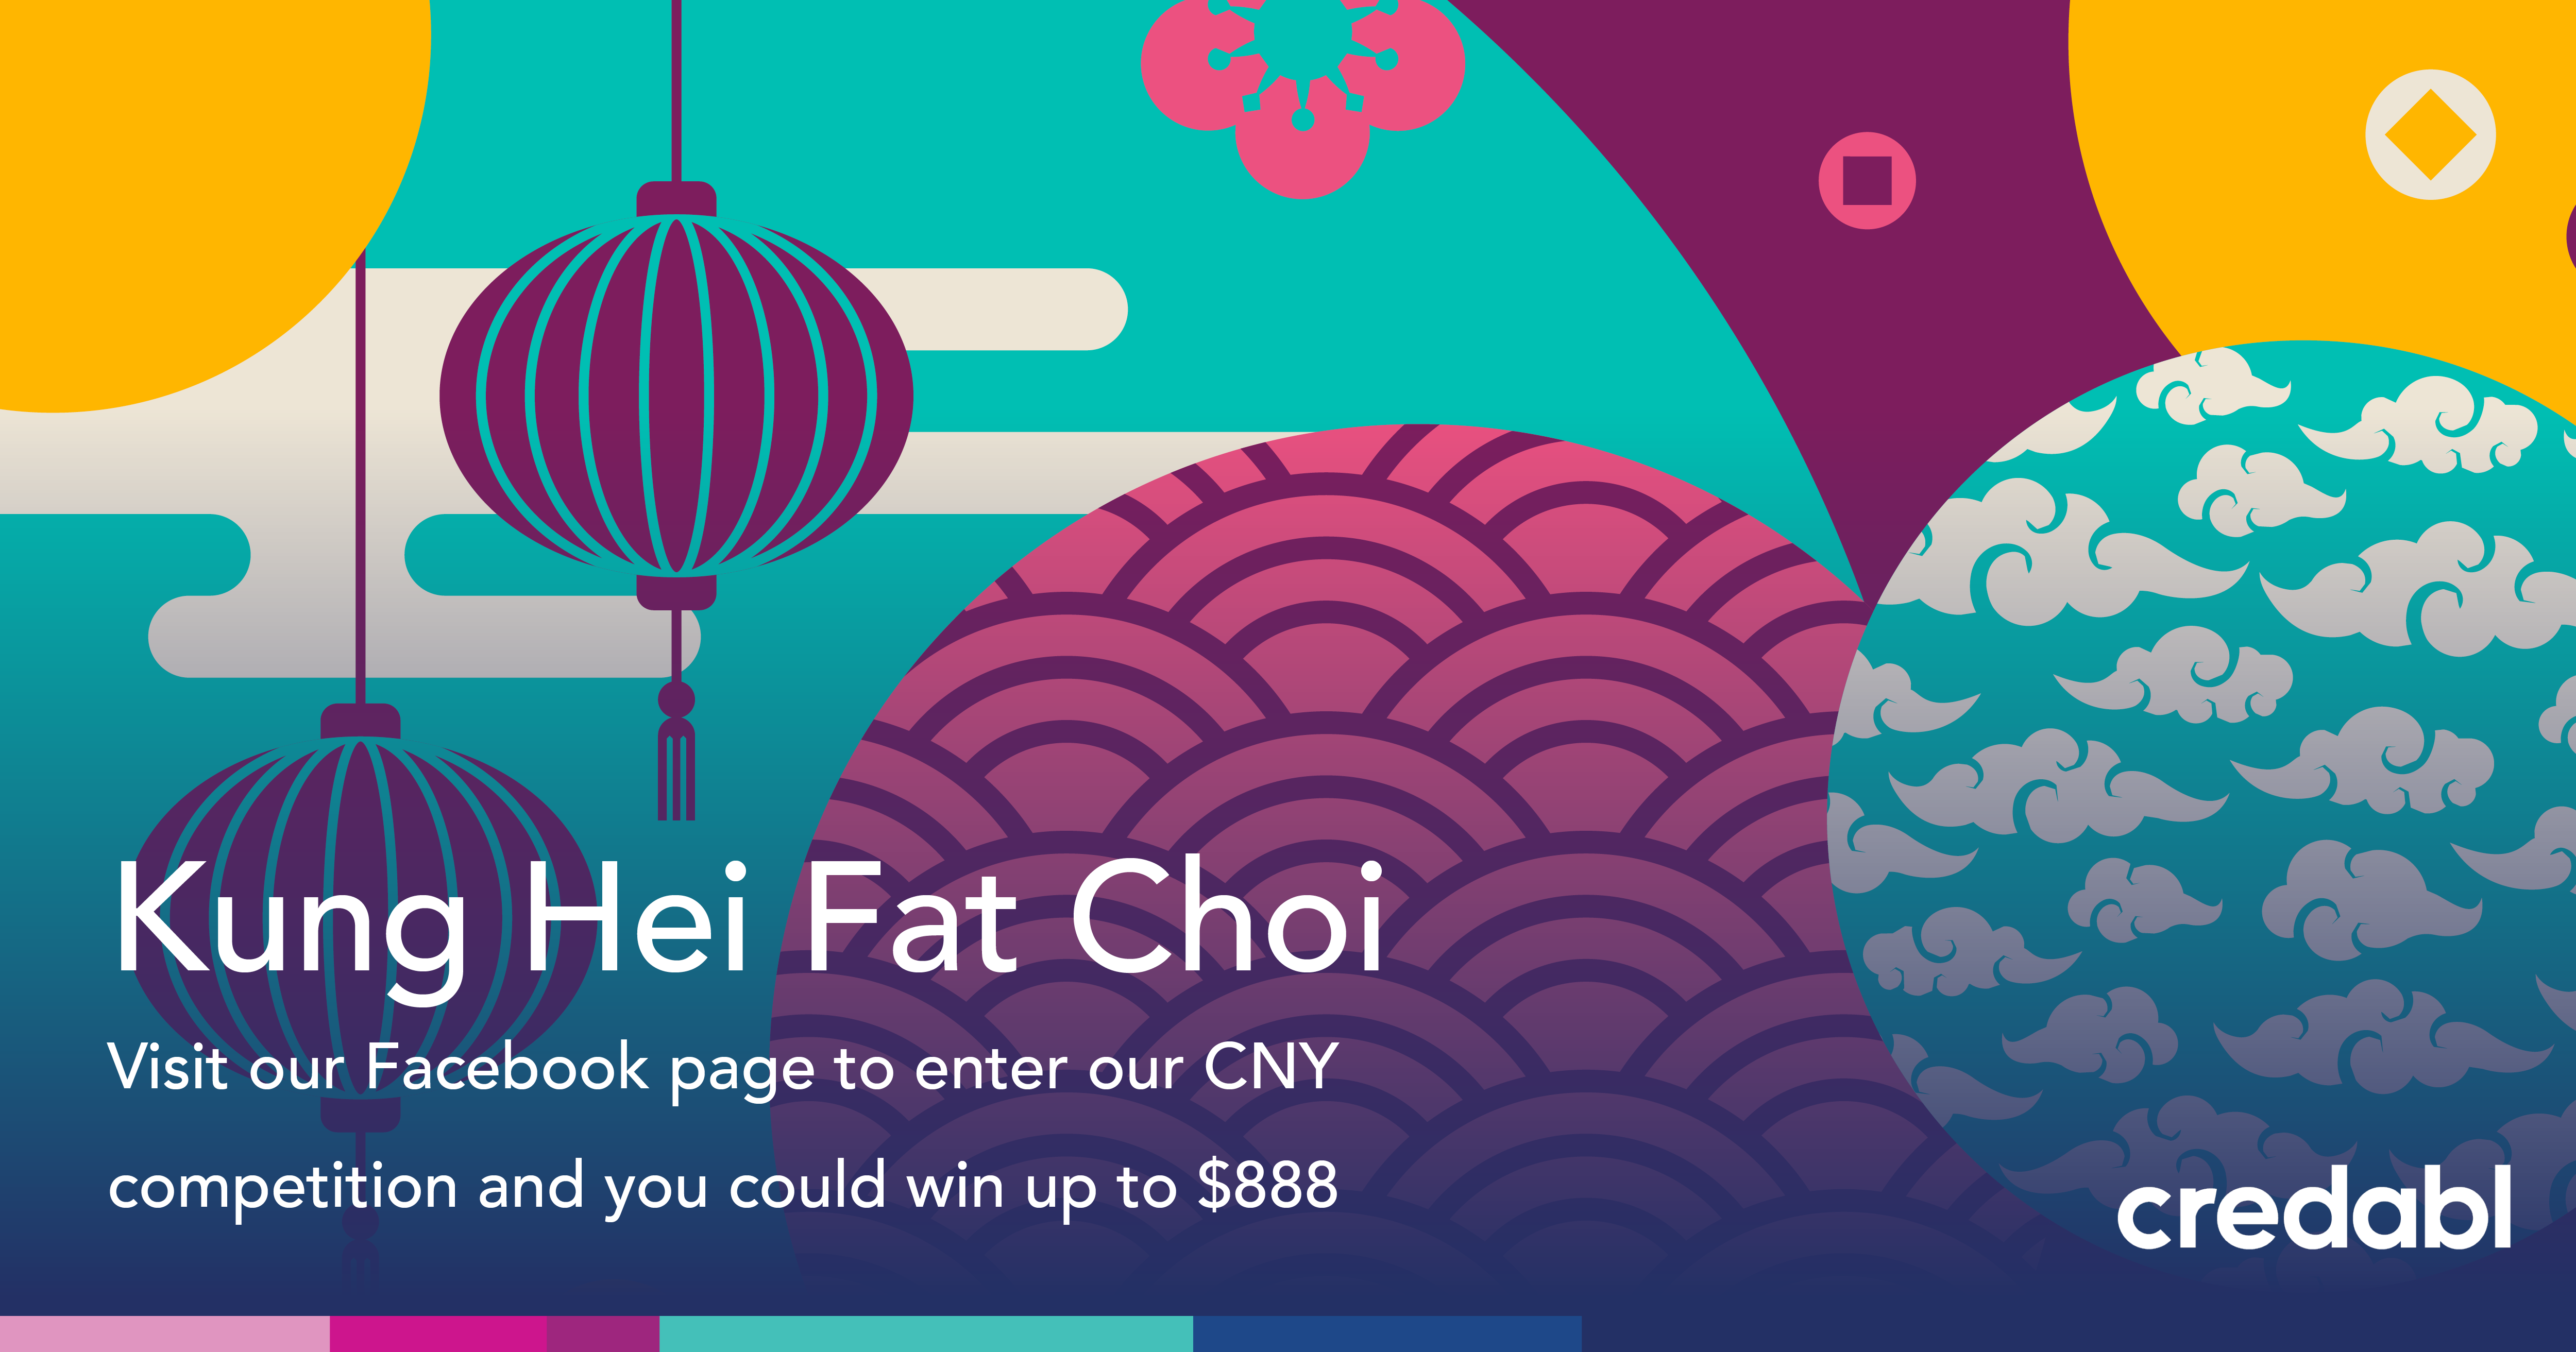 Kung Hei Fat Choi - win up to $888 Image